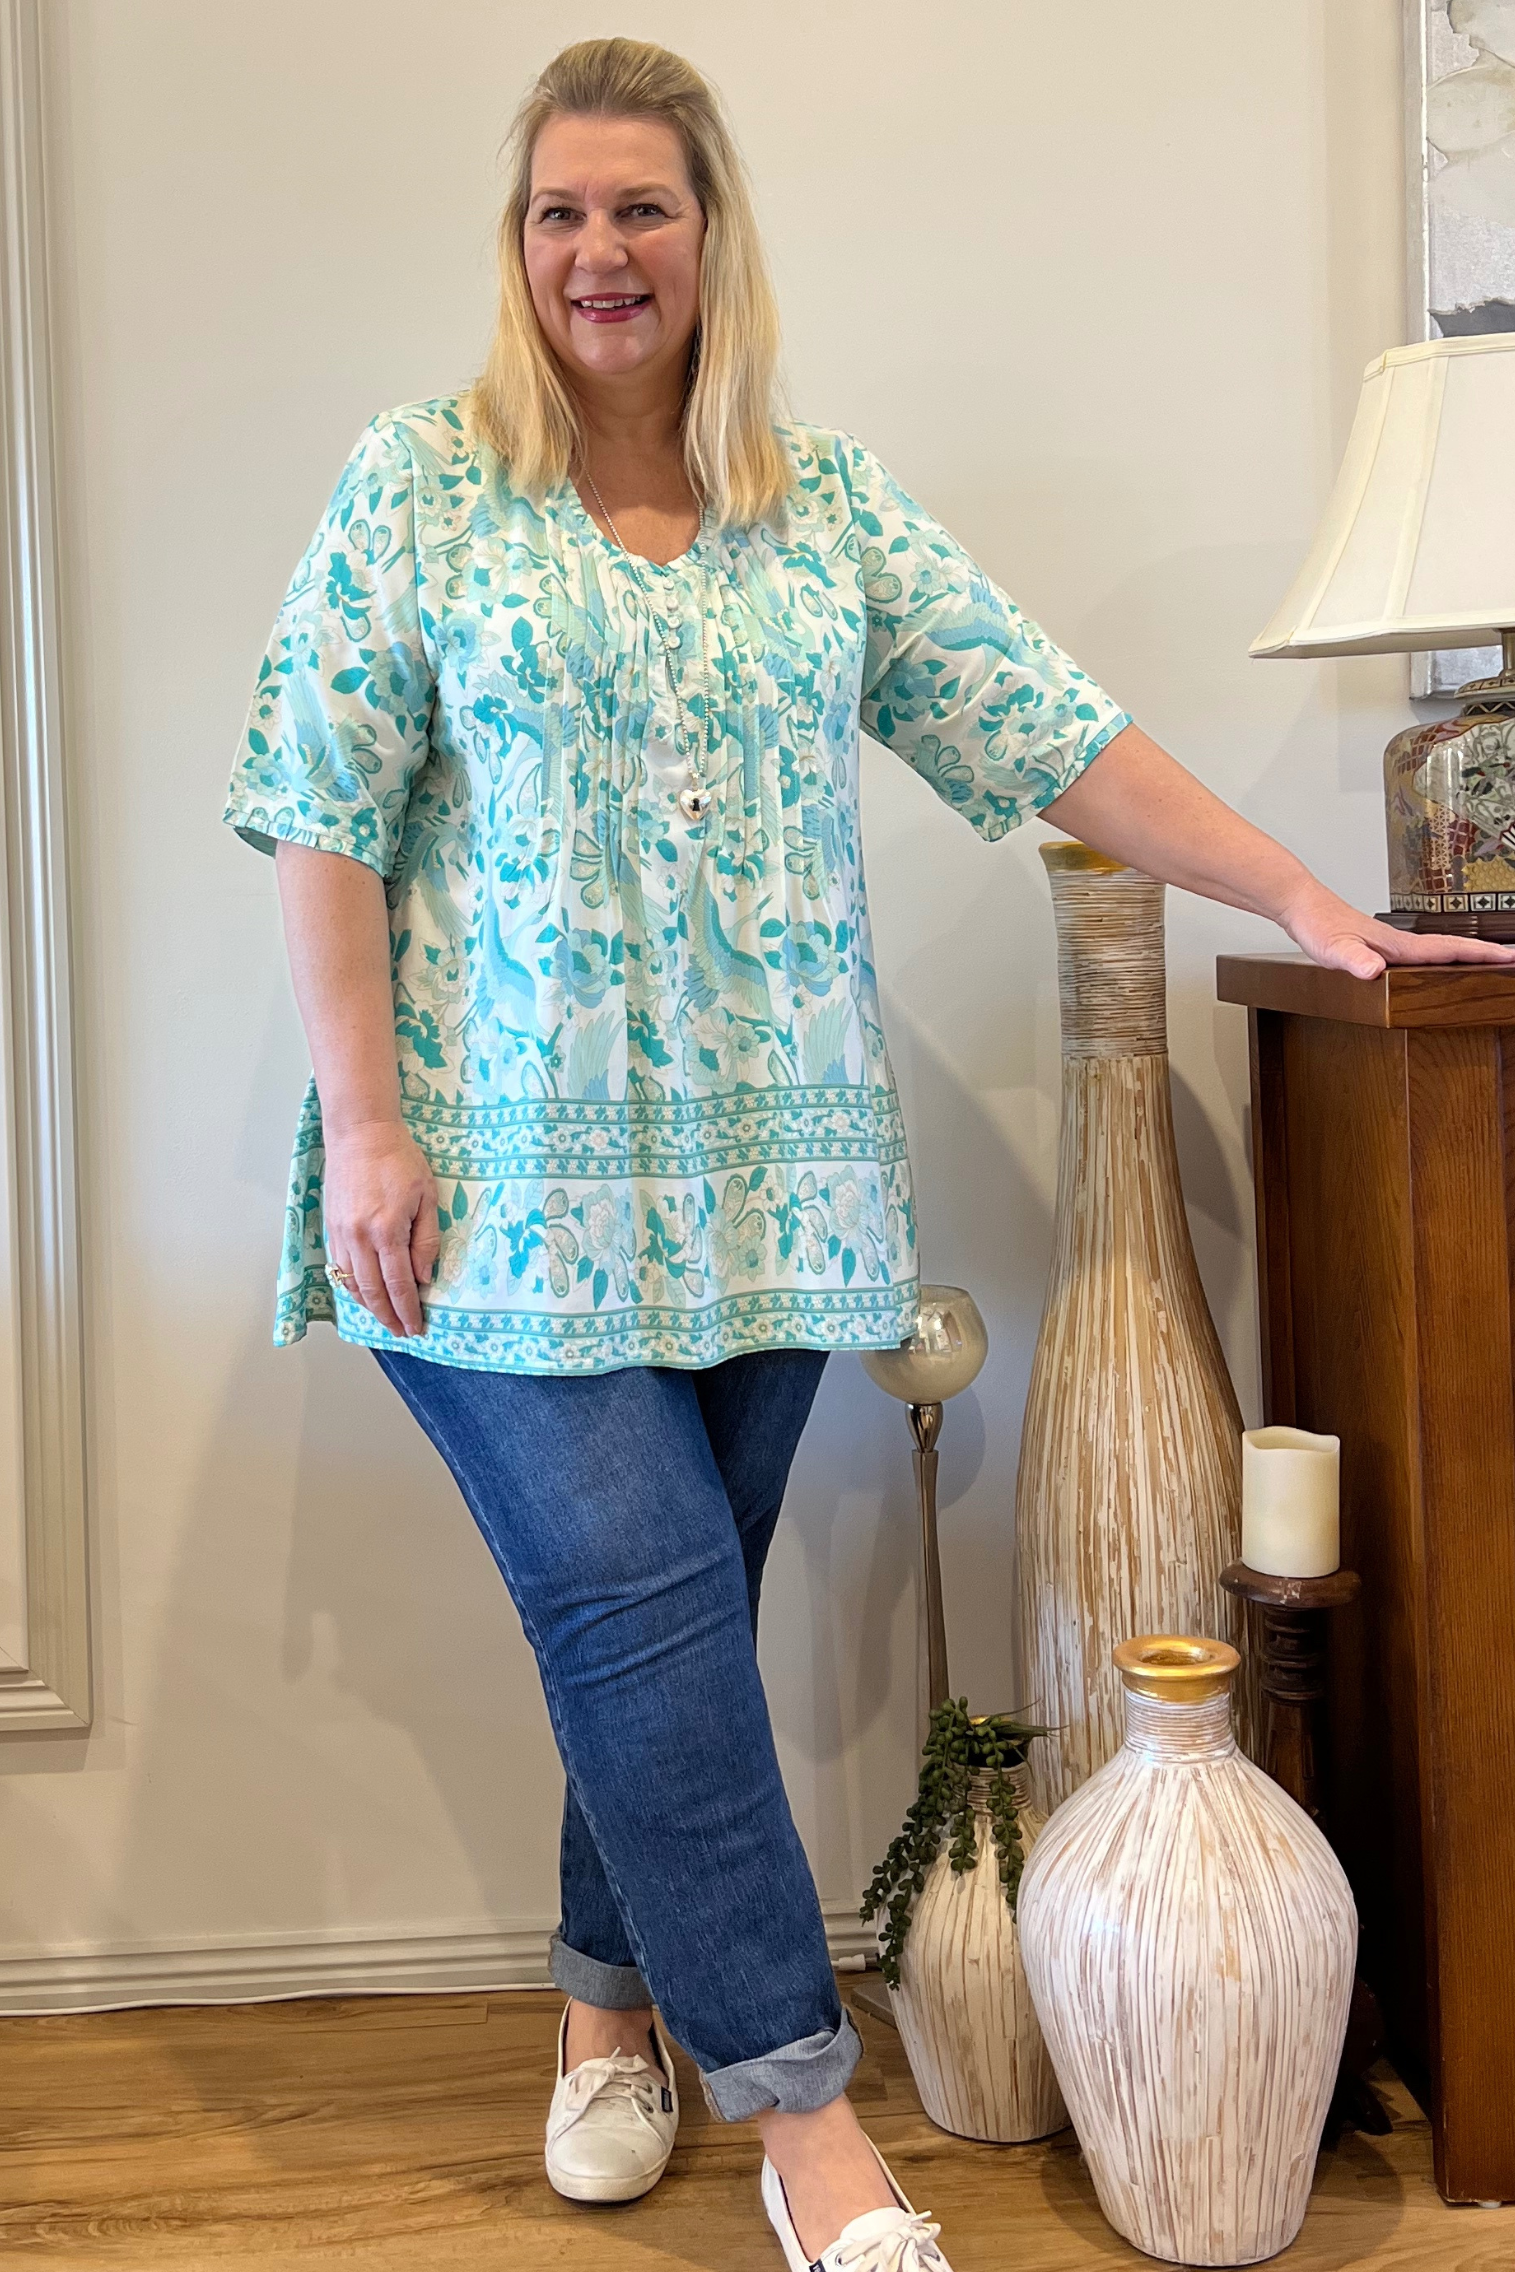 Kita Ku modelling the soft aqua and off white wren print in the top Ebony over jeans and in a lounge setting.